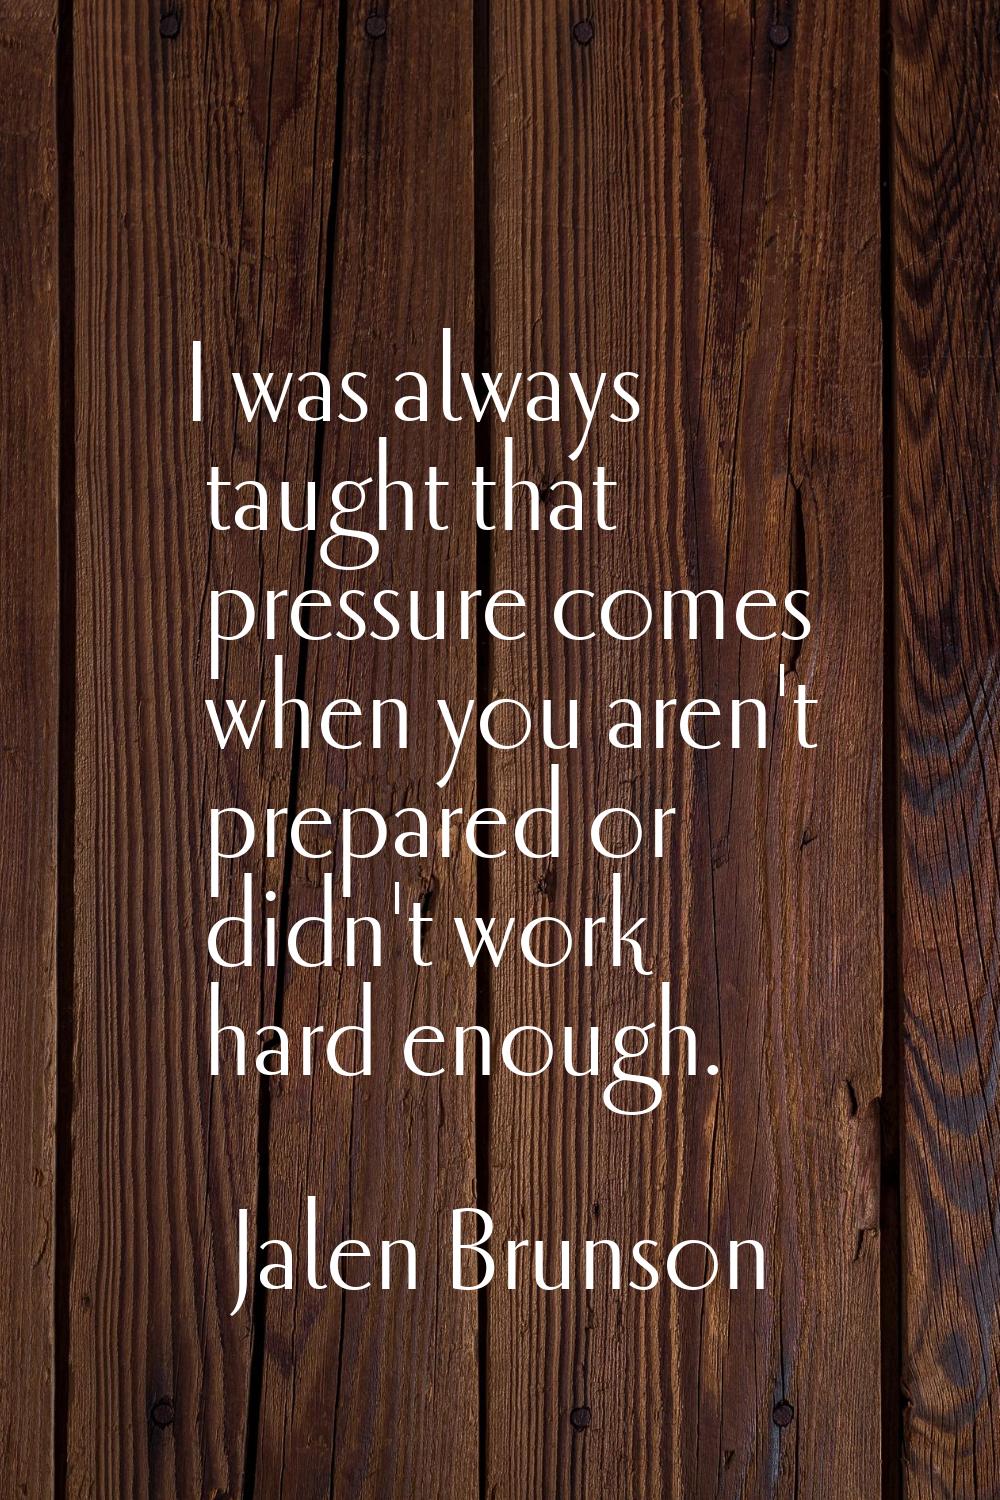 I was always taught that pressure comes when you aren't prepared or didn't work hard enough.